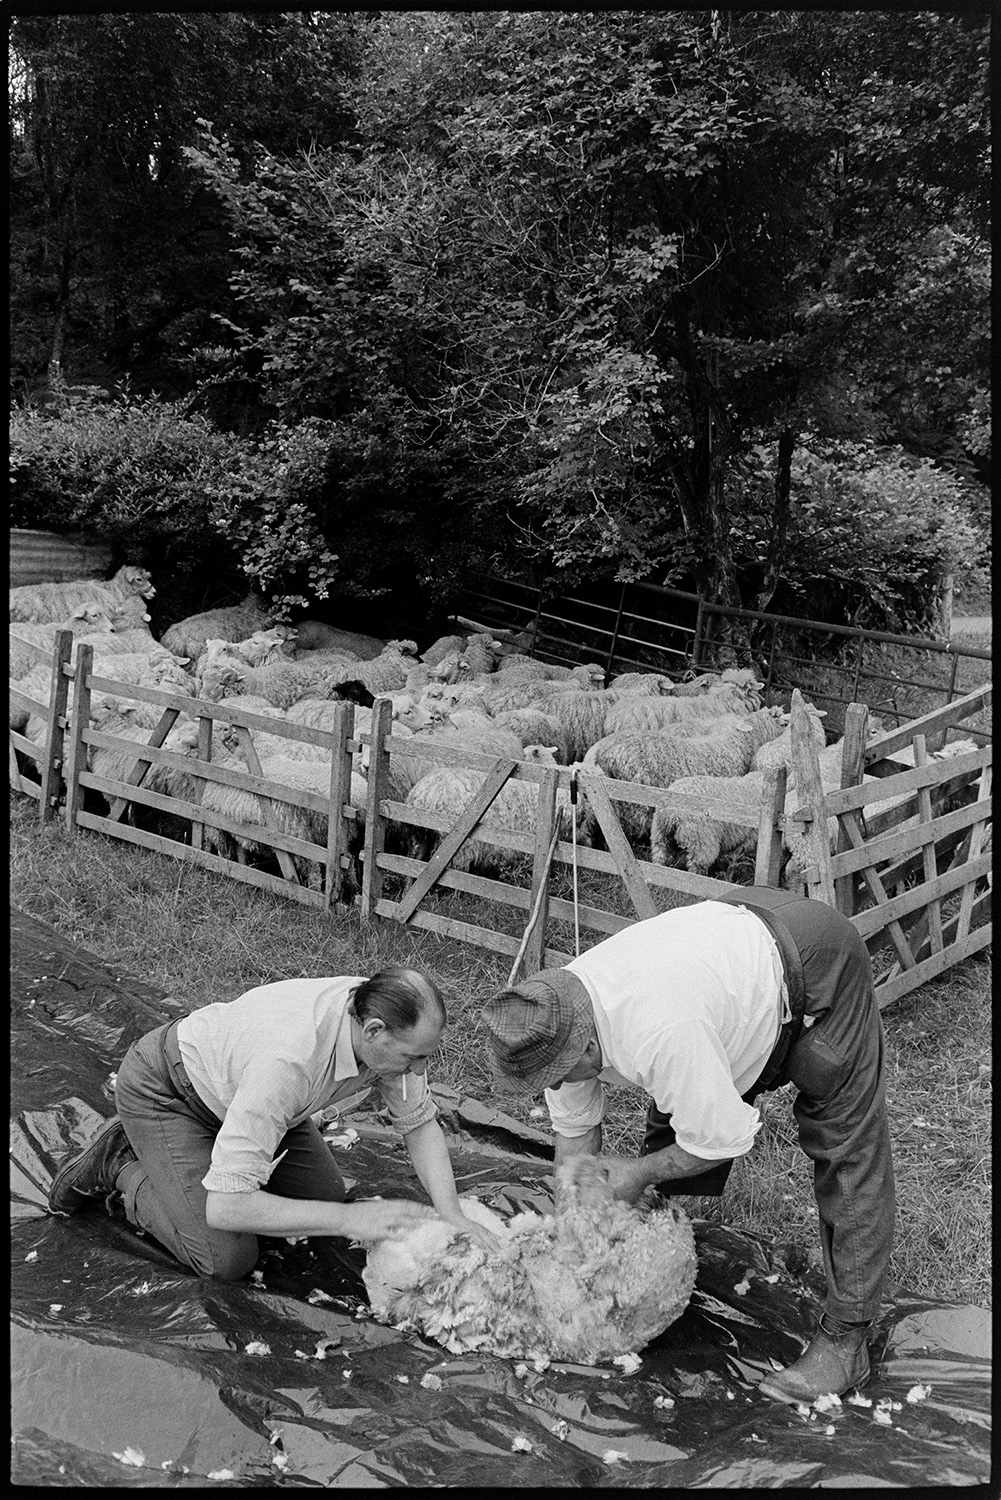 Shearing sheep, tying up fleeces. 
[Archie Parkhouse and another man folding and tying up sheep fleeces in a field at Addisford Dolton. The other man is smoking a cigarette. Sheep can be seen in a pen behind them.]